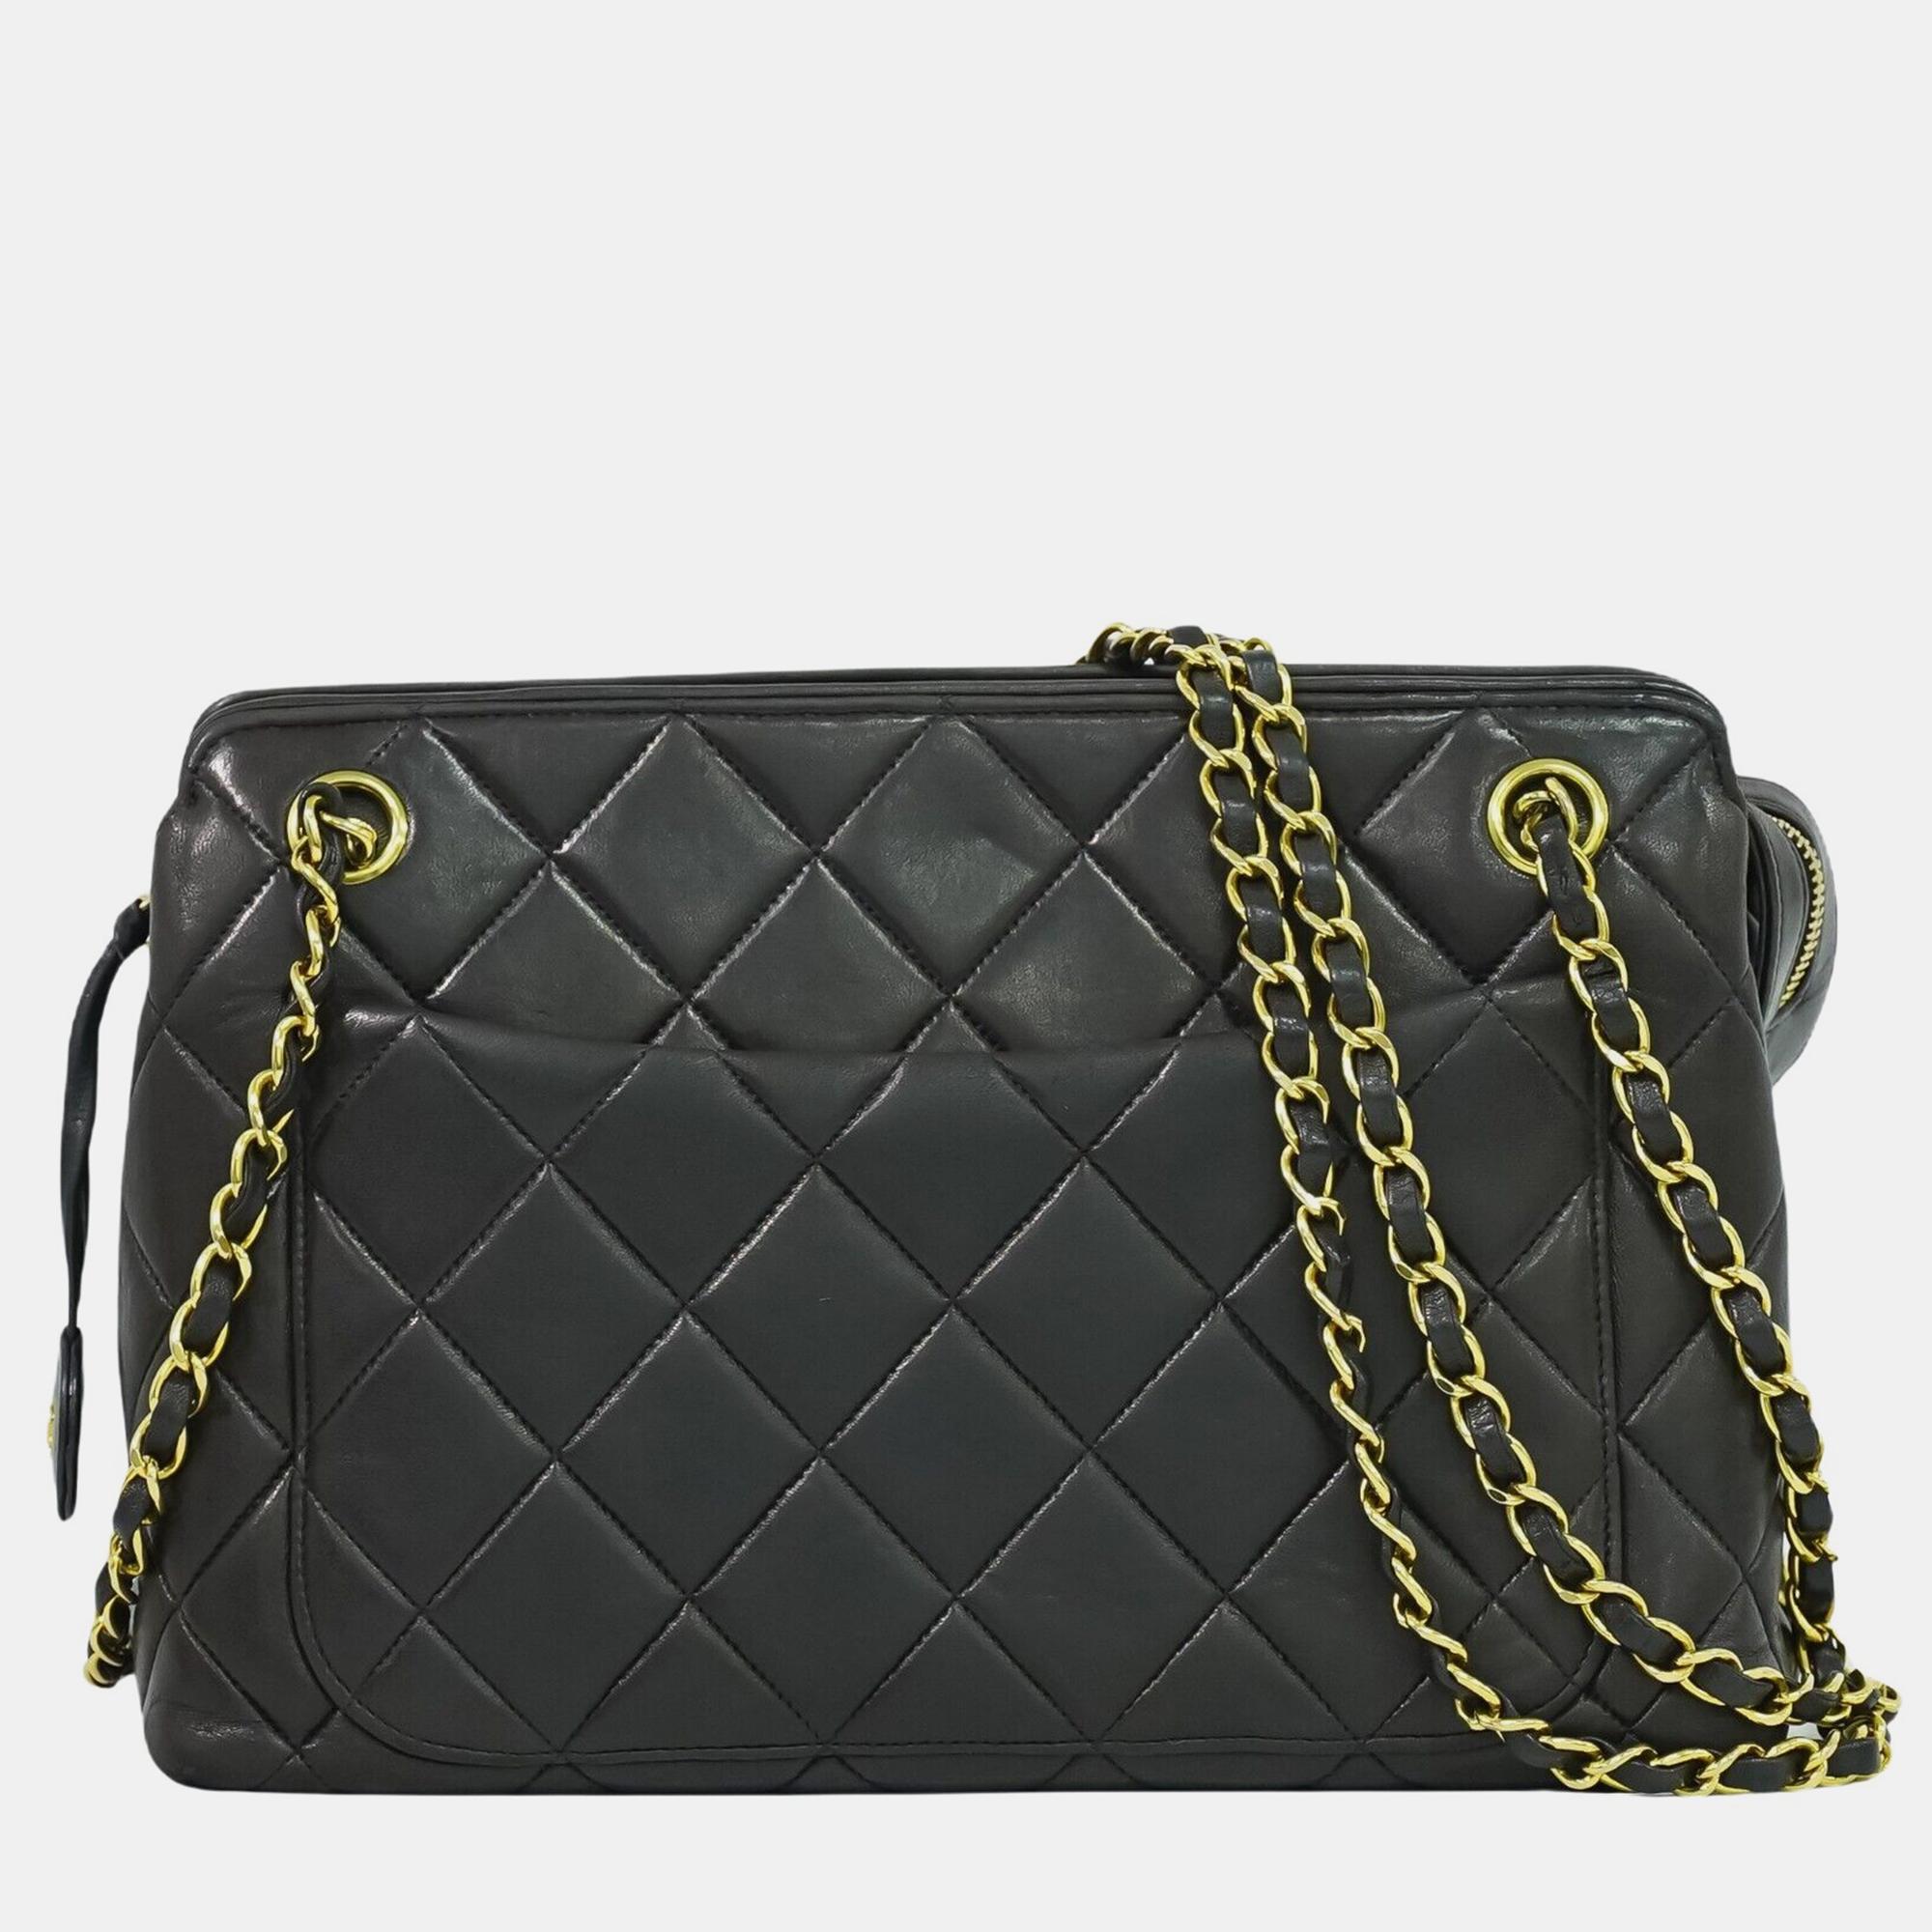 Chanel black leather quilted chain shoulder bag